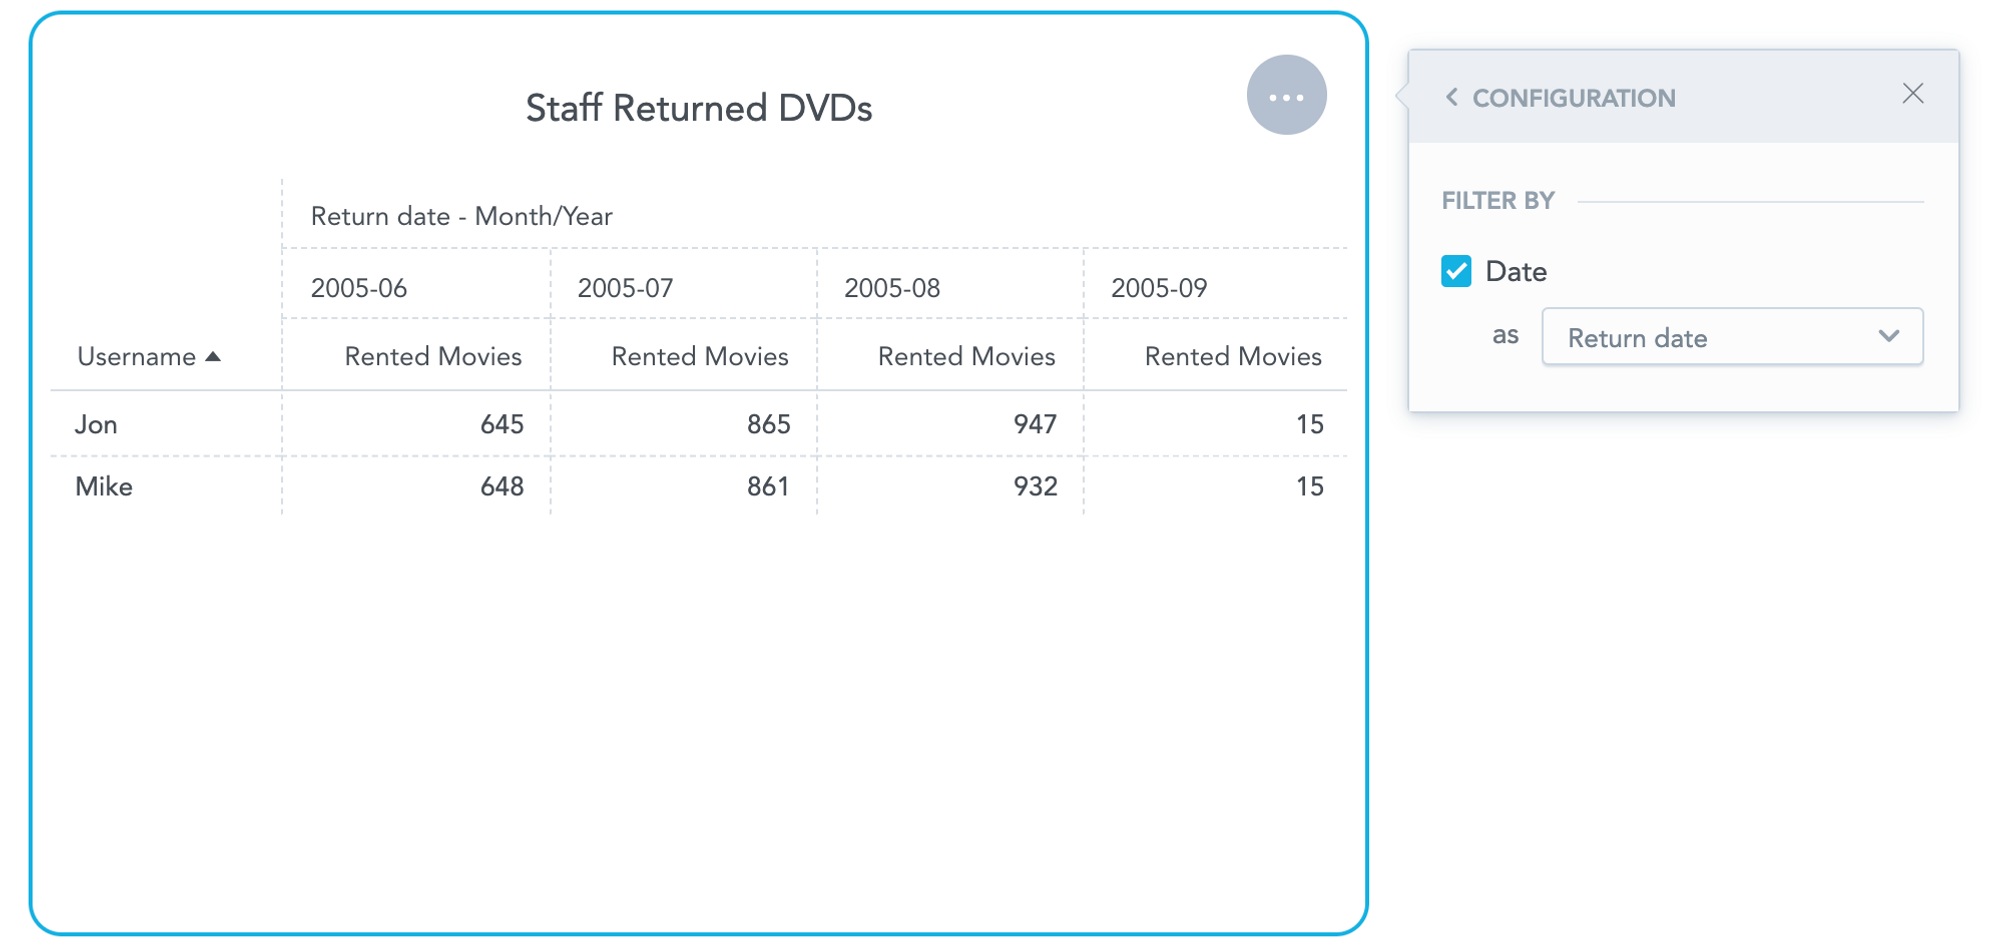 A second report that demonstrates how many DVD returns occurred per month